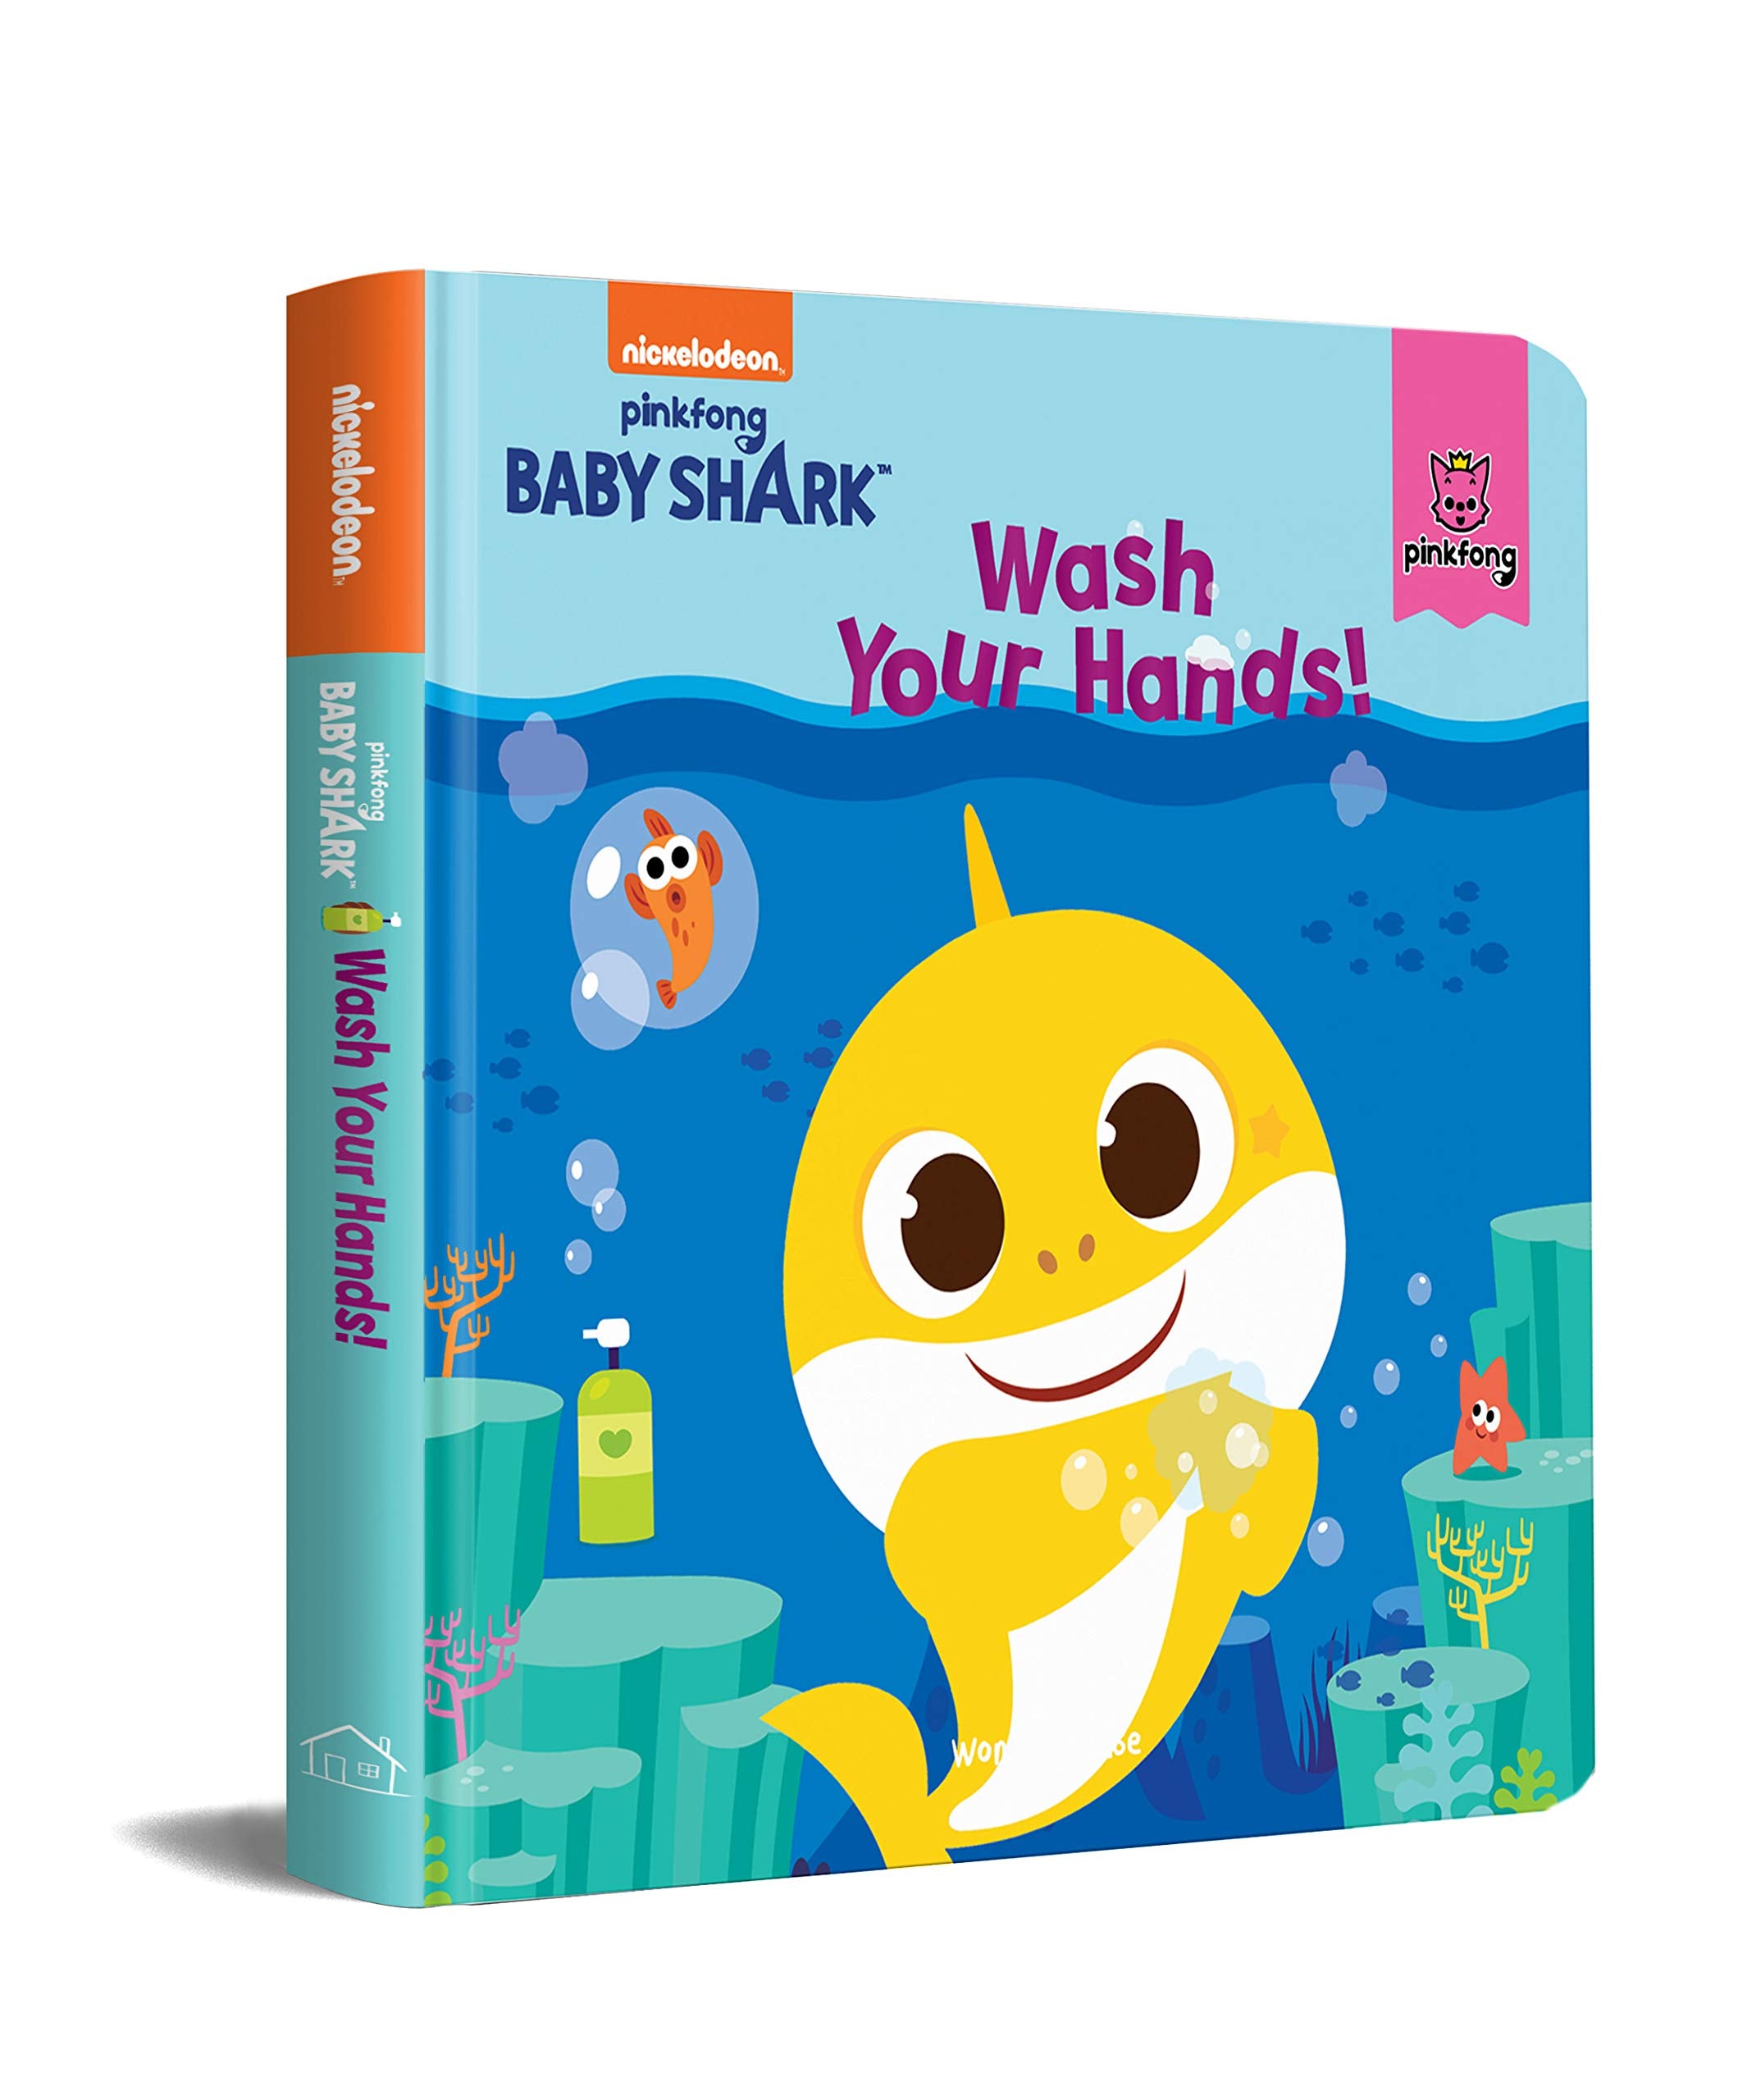 Pinkfong Baby Shark - Wash Your Hands